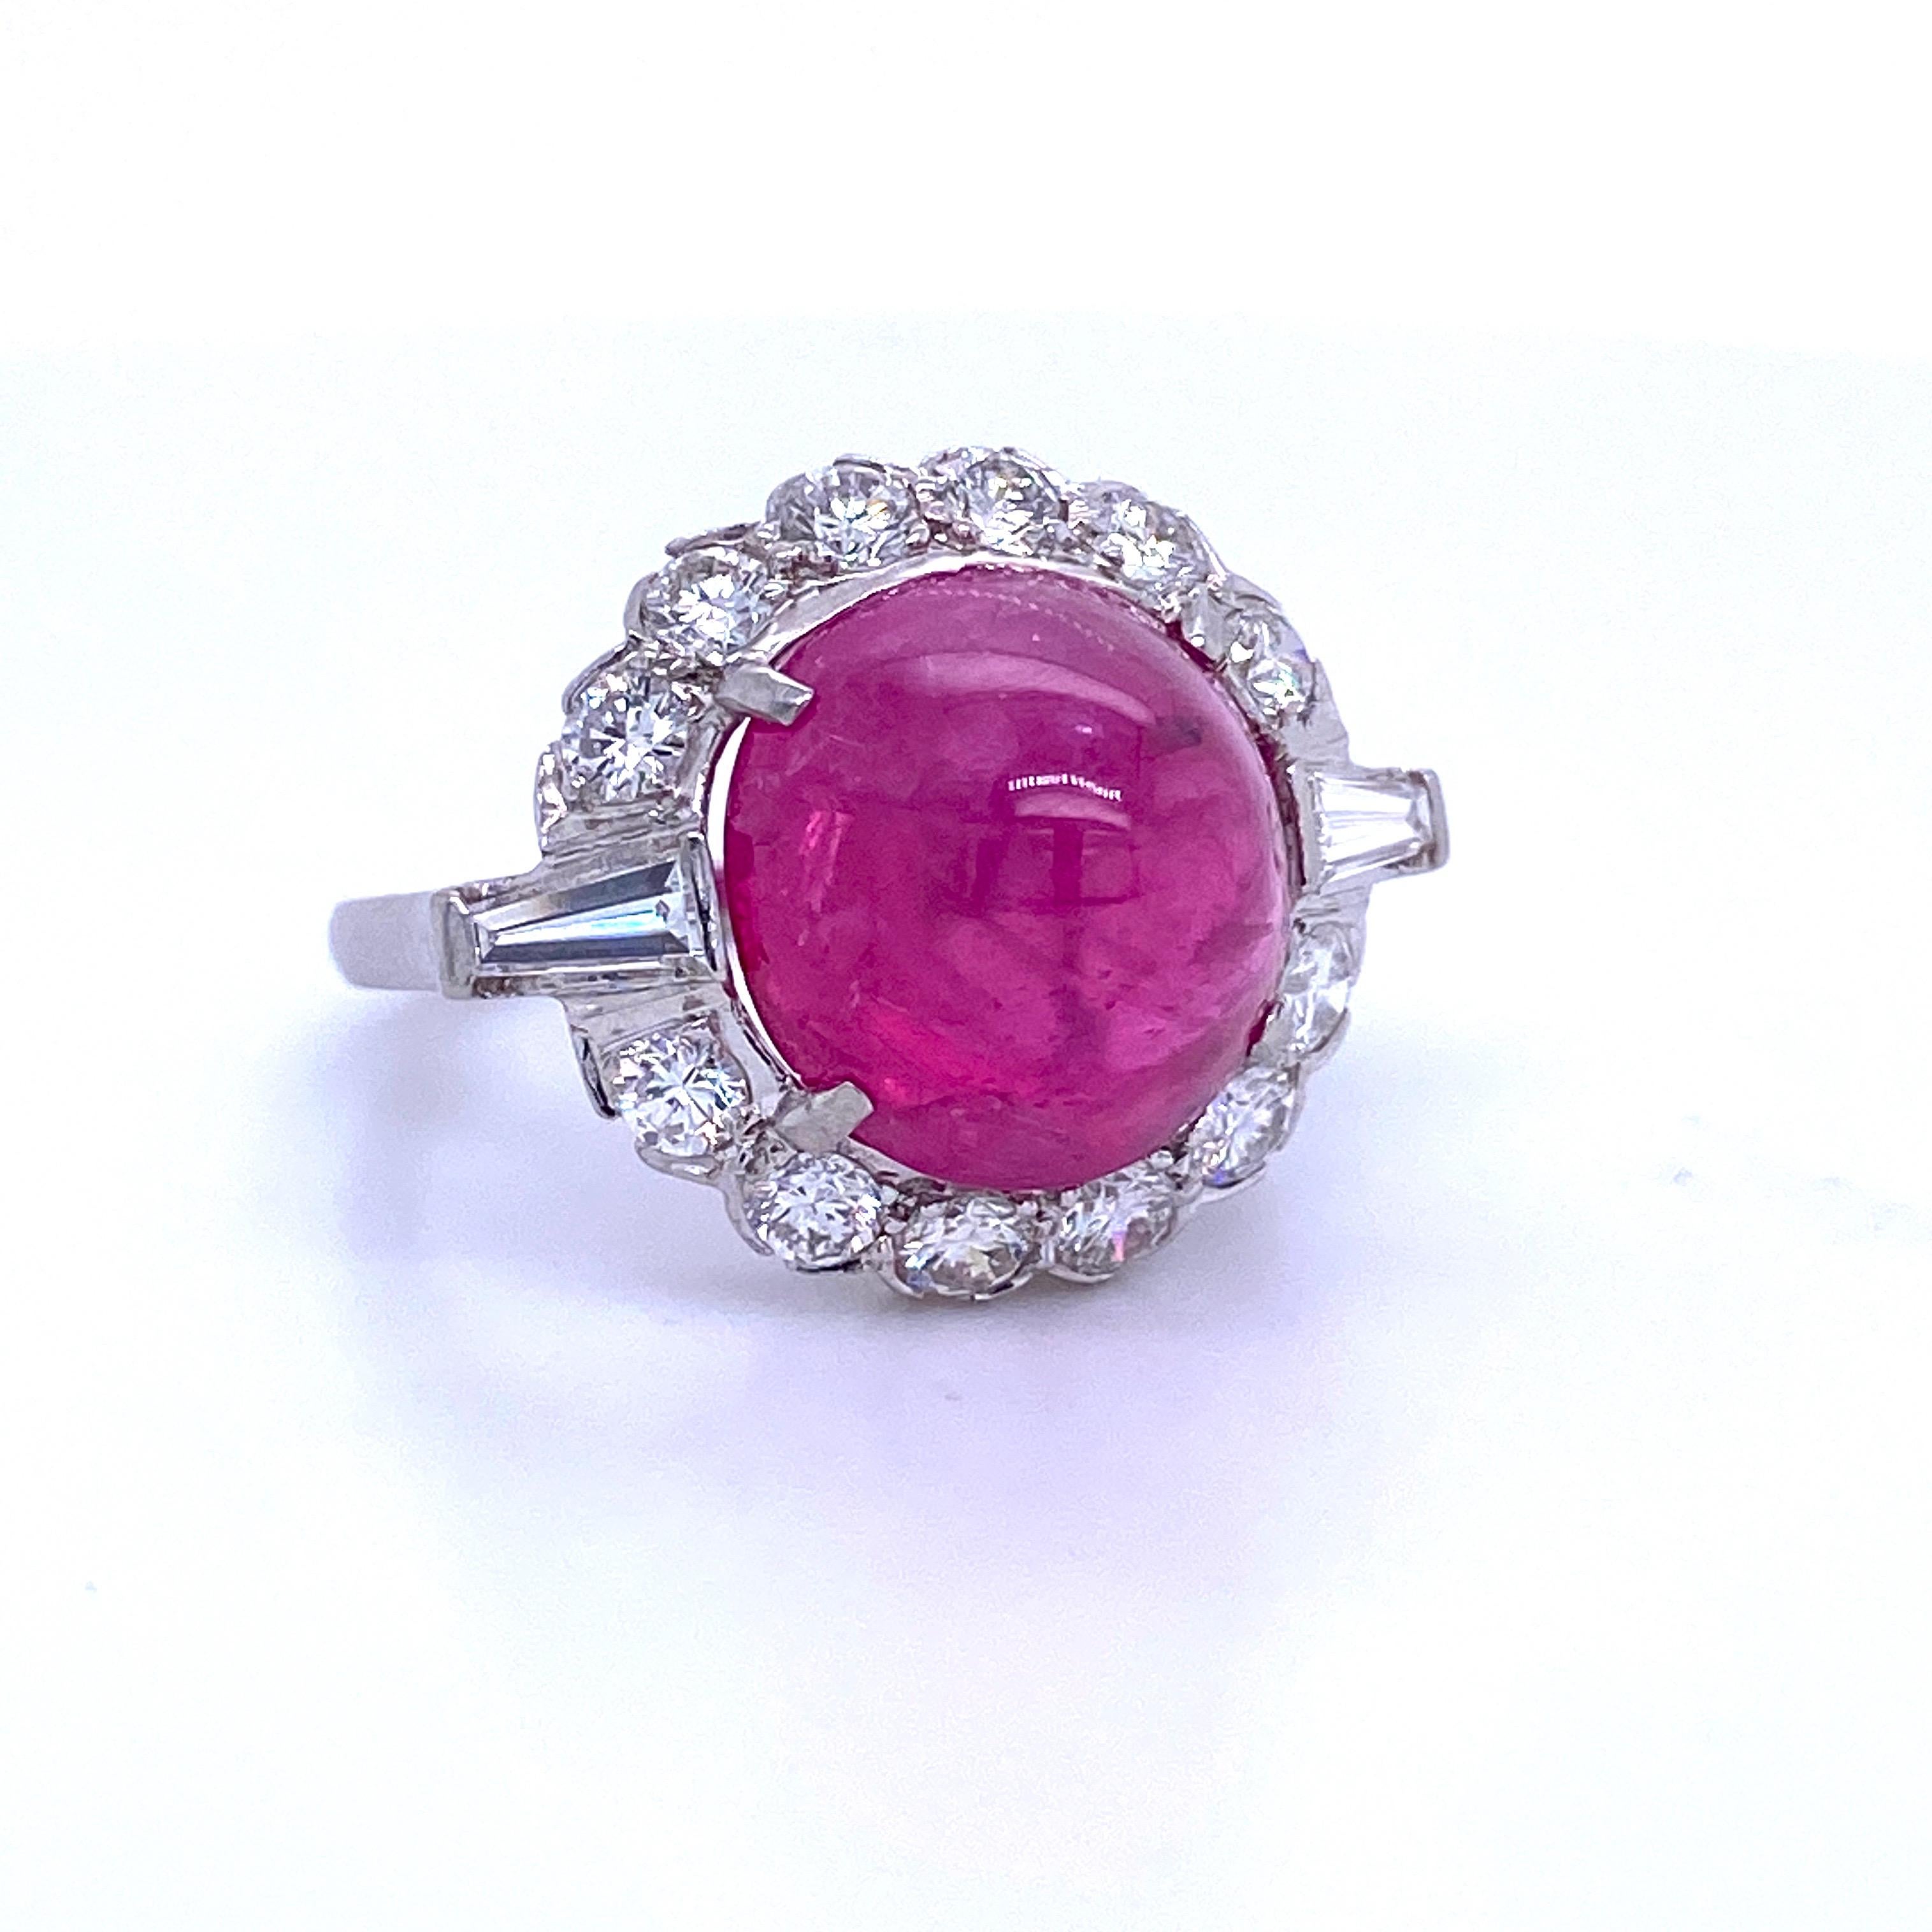 Platinum cocktail ring featuring one GIA Certified Sugar Loaf Ruby weighing 10.42 carats flanked with round brilliants and baguettes weighing 1.50 carats. No Heat!
Color G
Clarity SI